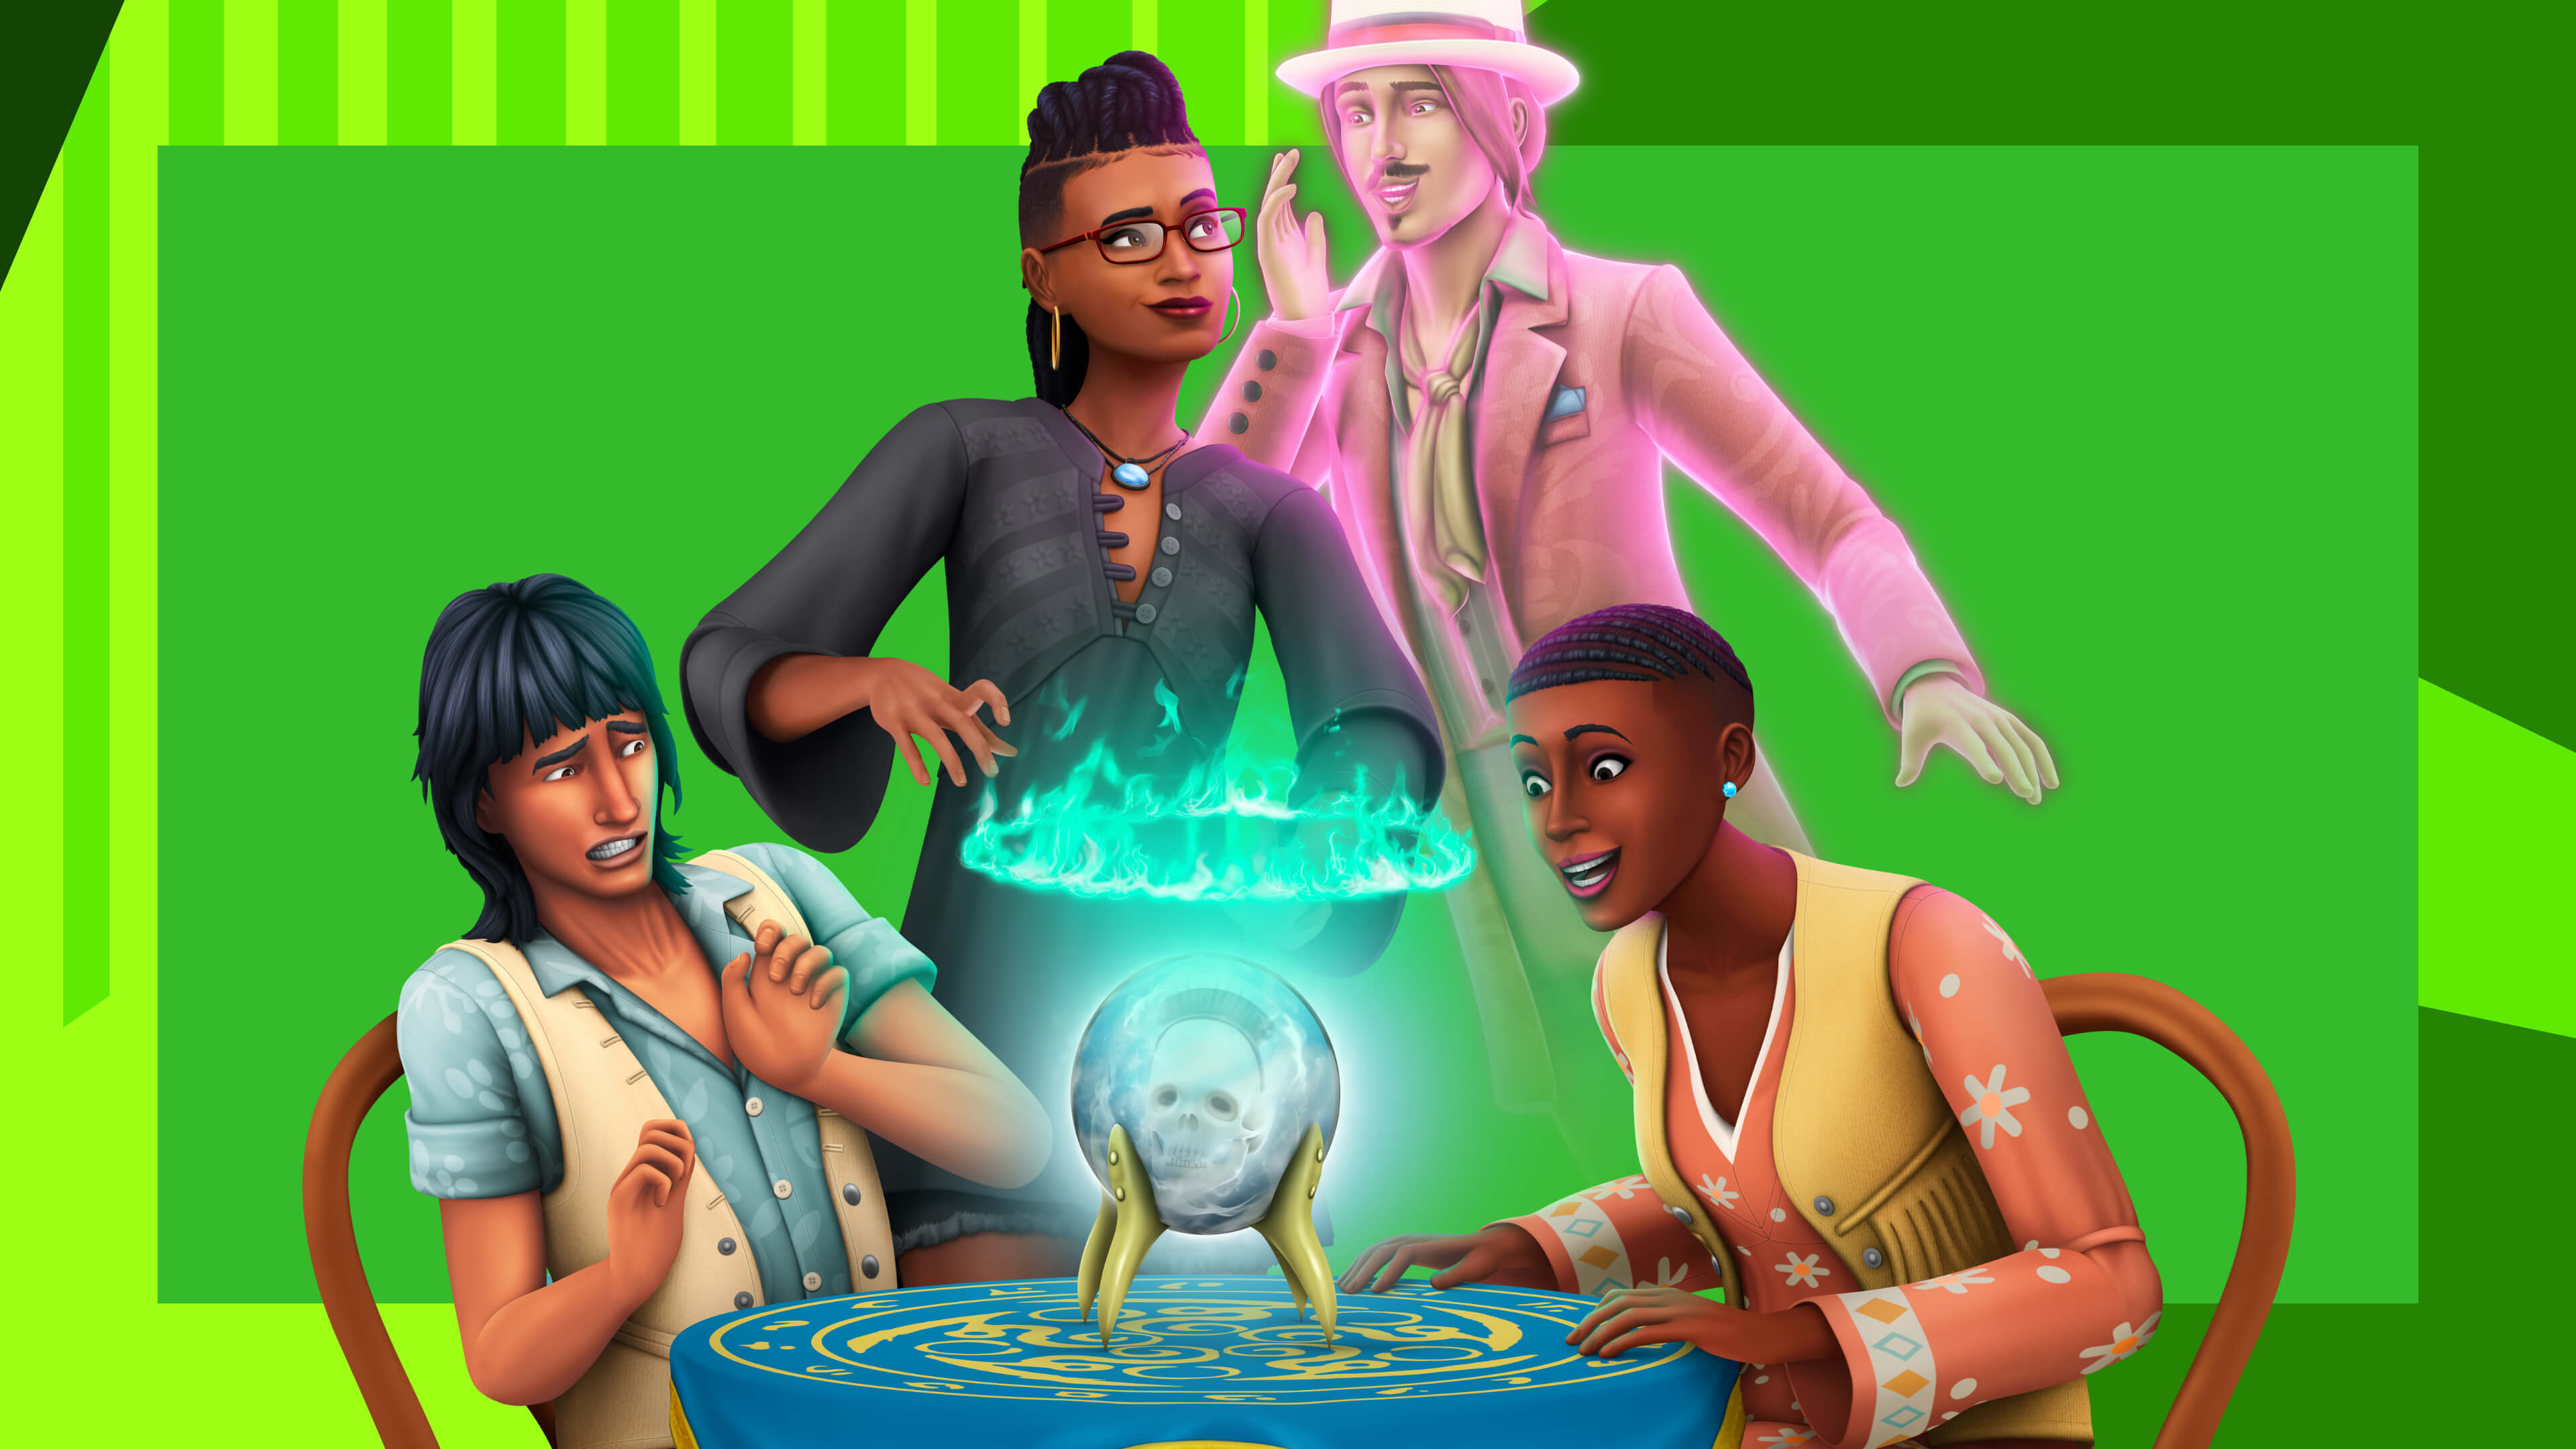 sims 4 demo download for mac